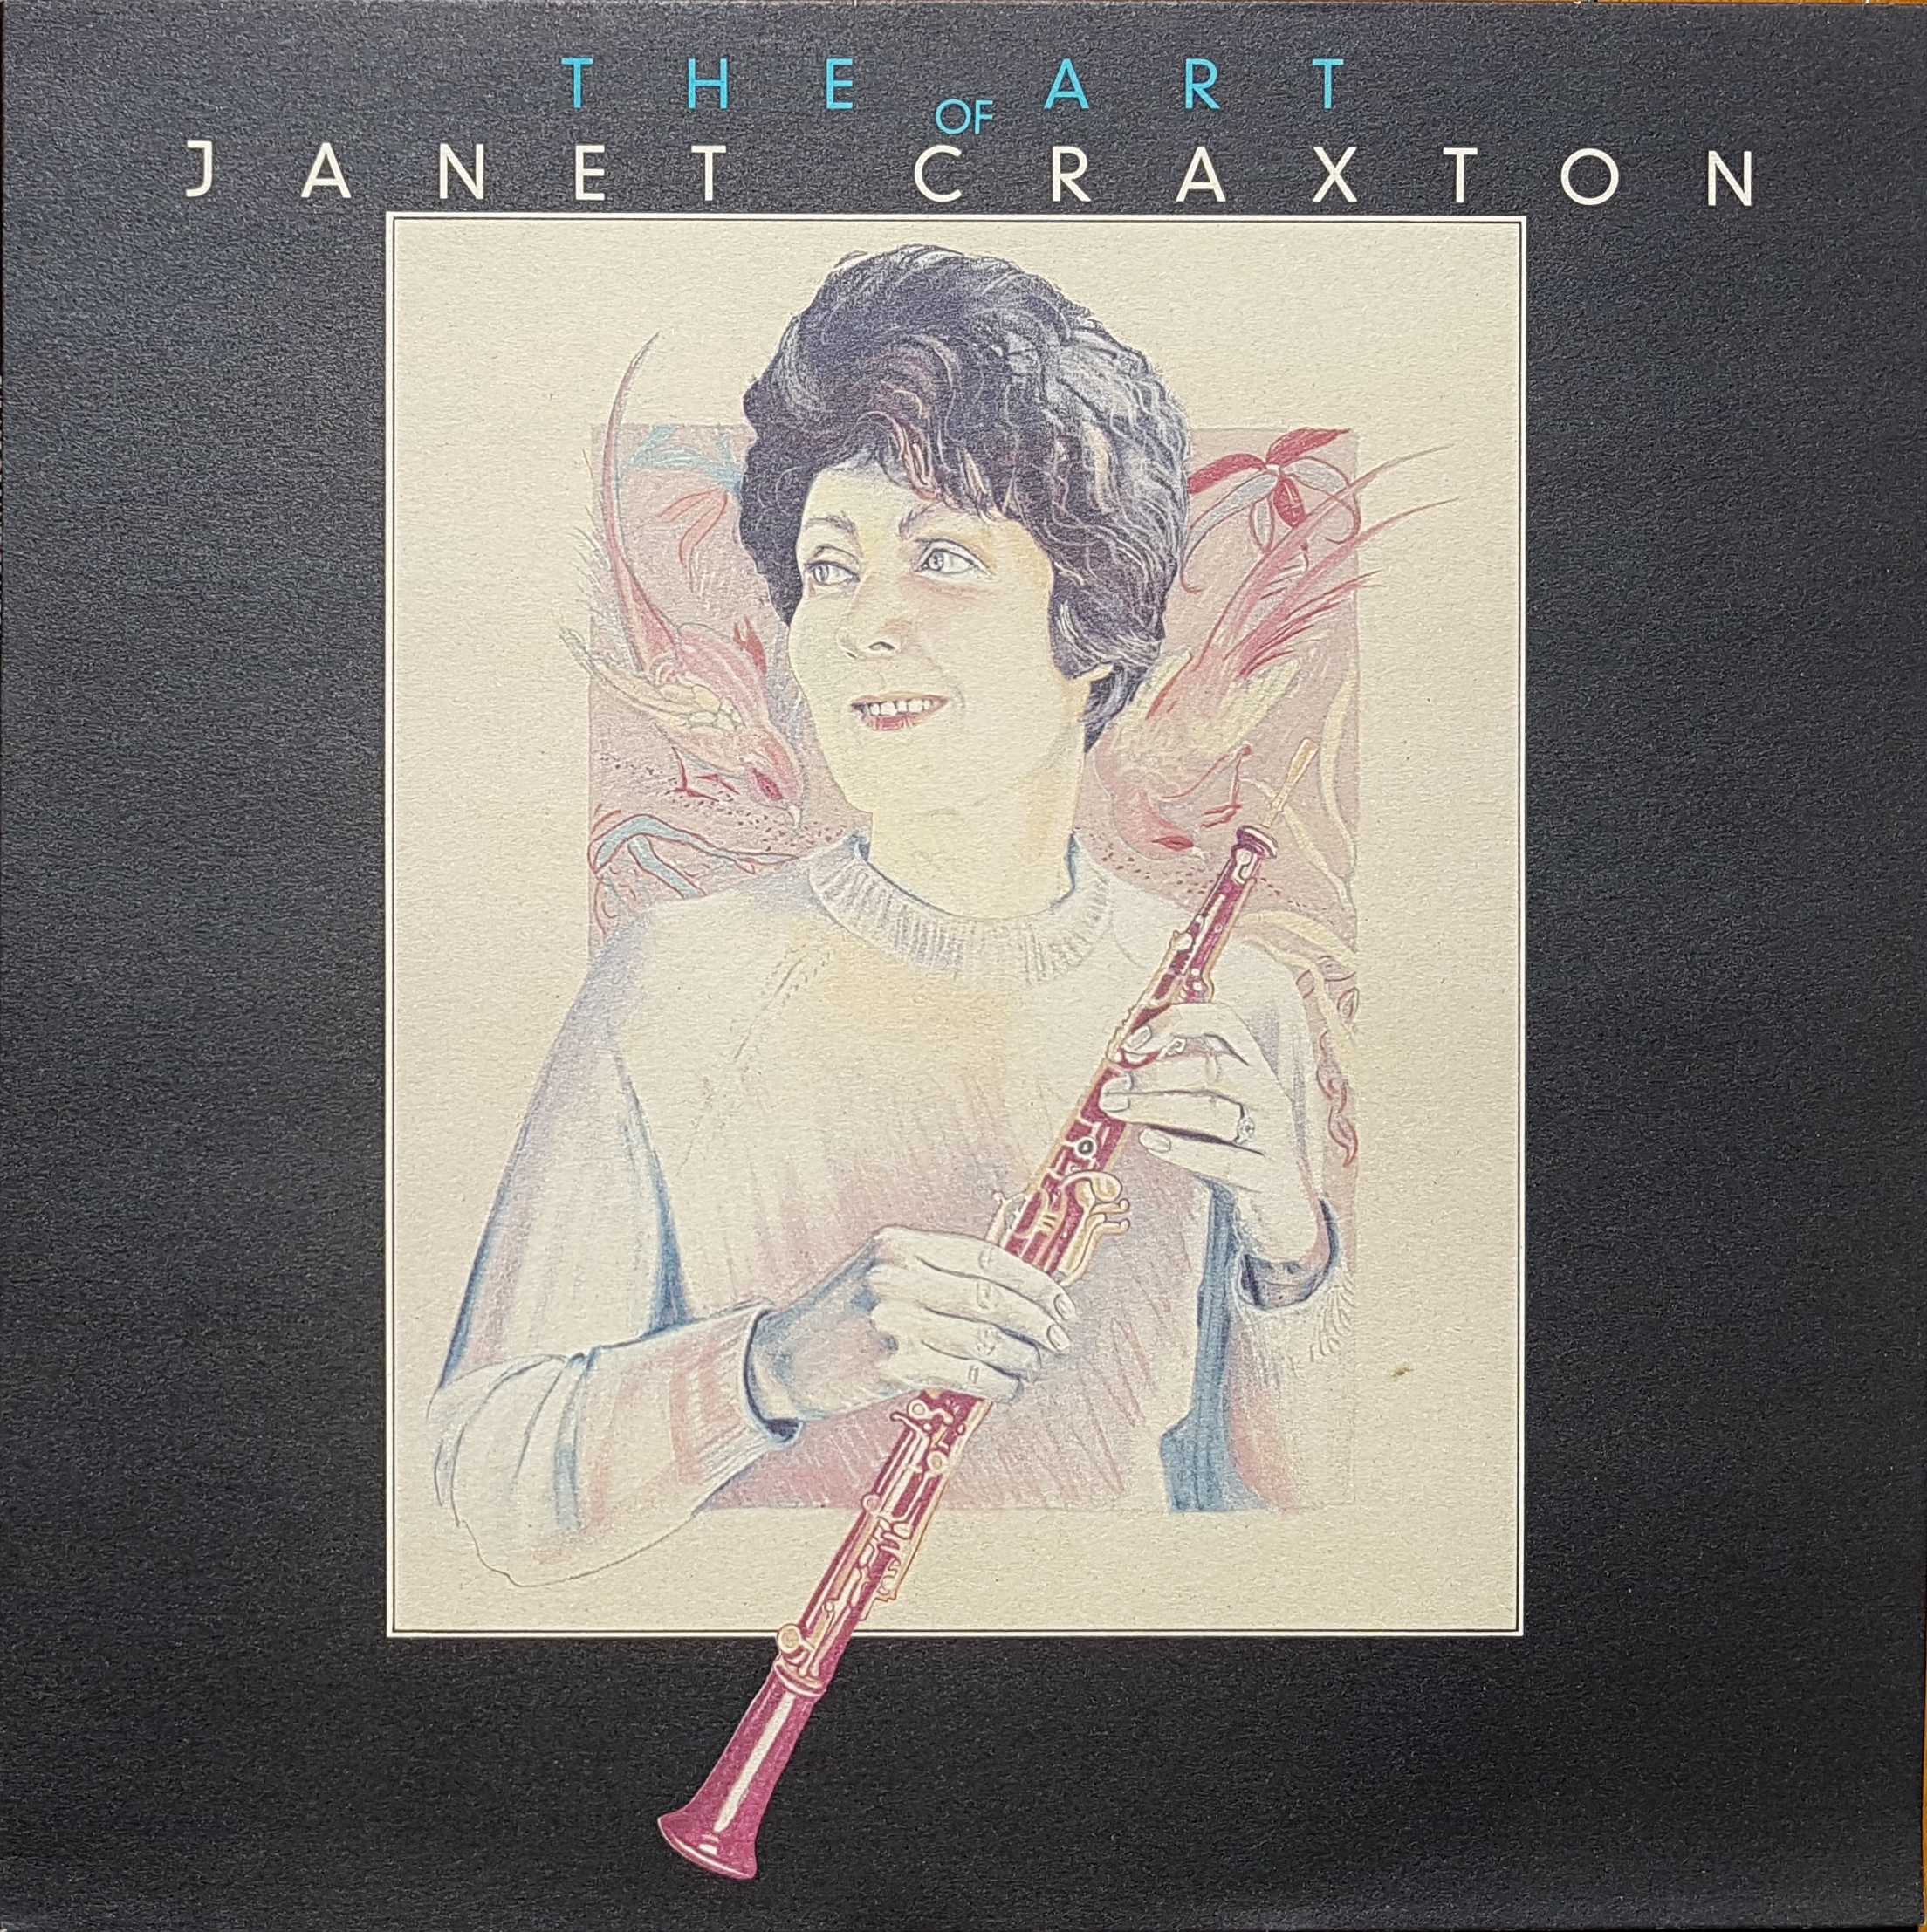 Picture of REN 635X The art of Janet Craxton by artist Janet Craxton from the BBC albums - Records and Tapes library